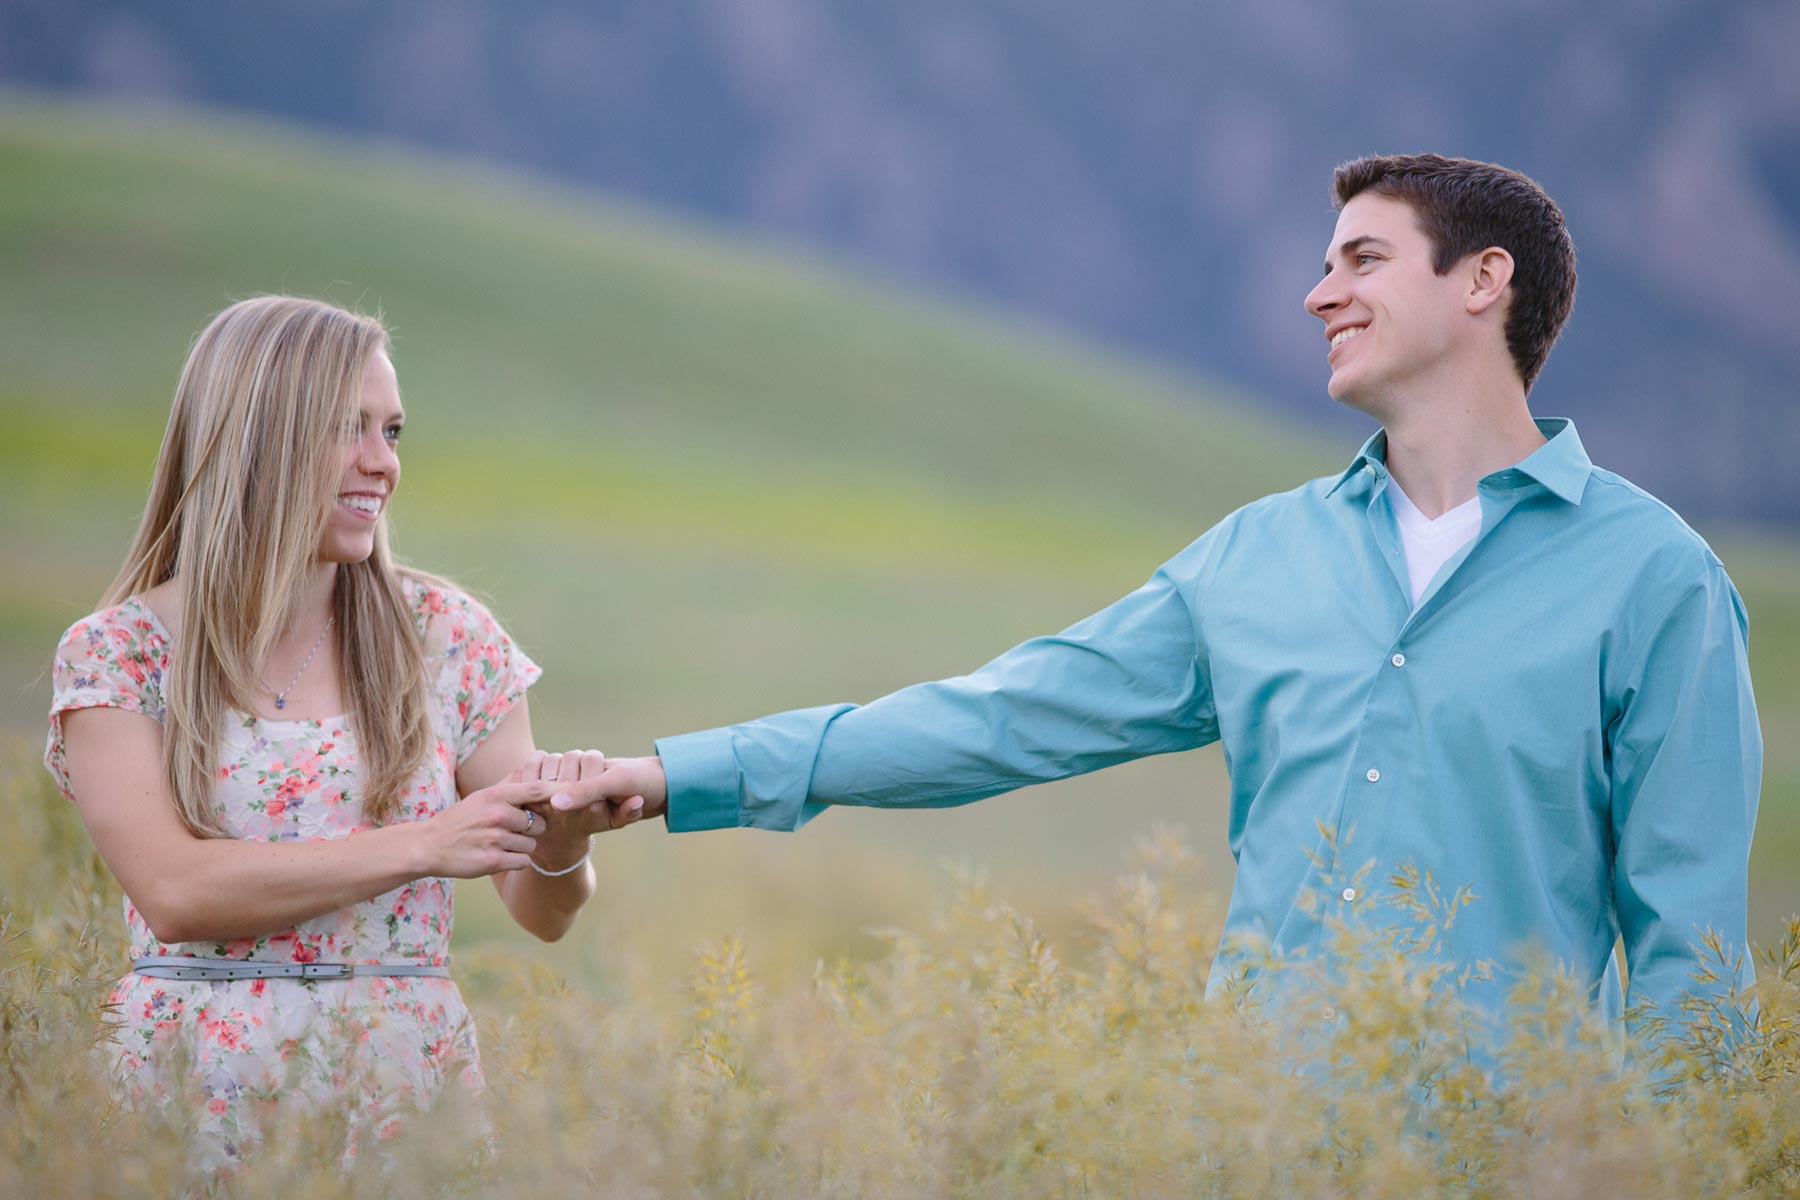 Irivng-Photography-Kerstyn-Korby-Colorado-Engagement-Photographers-008